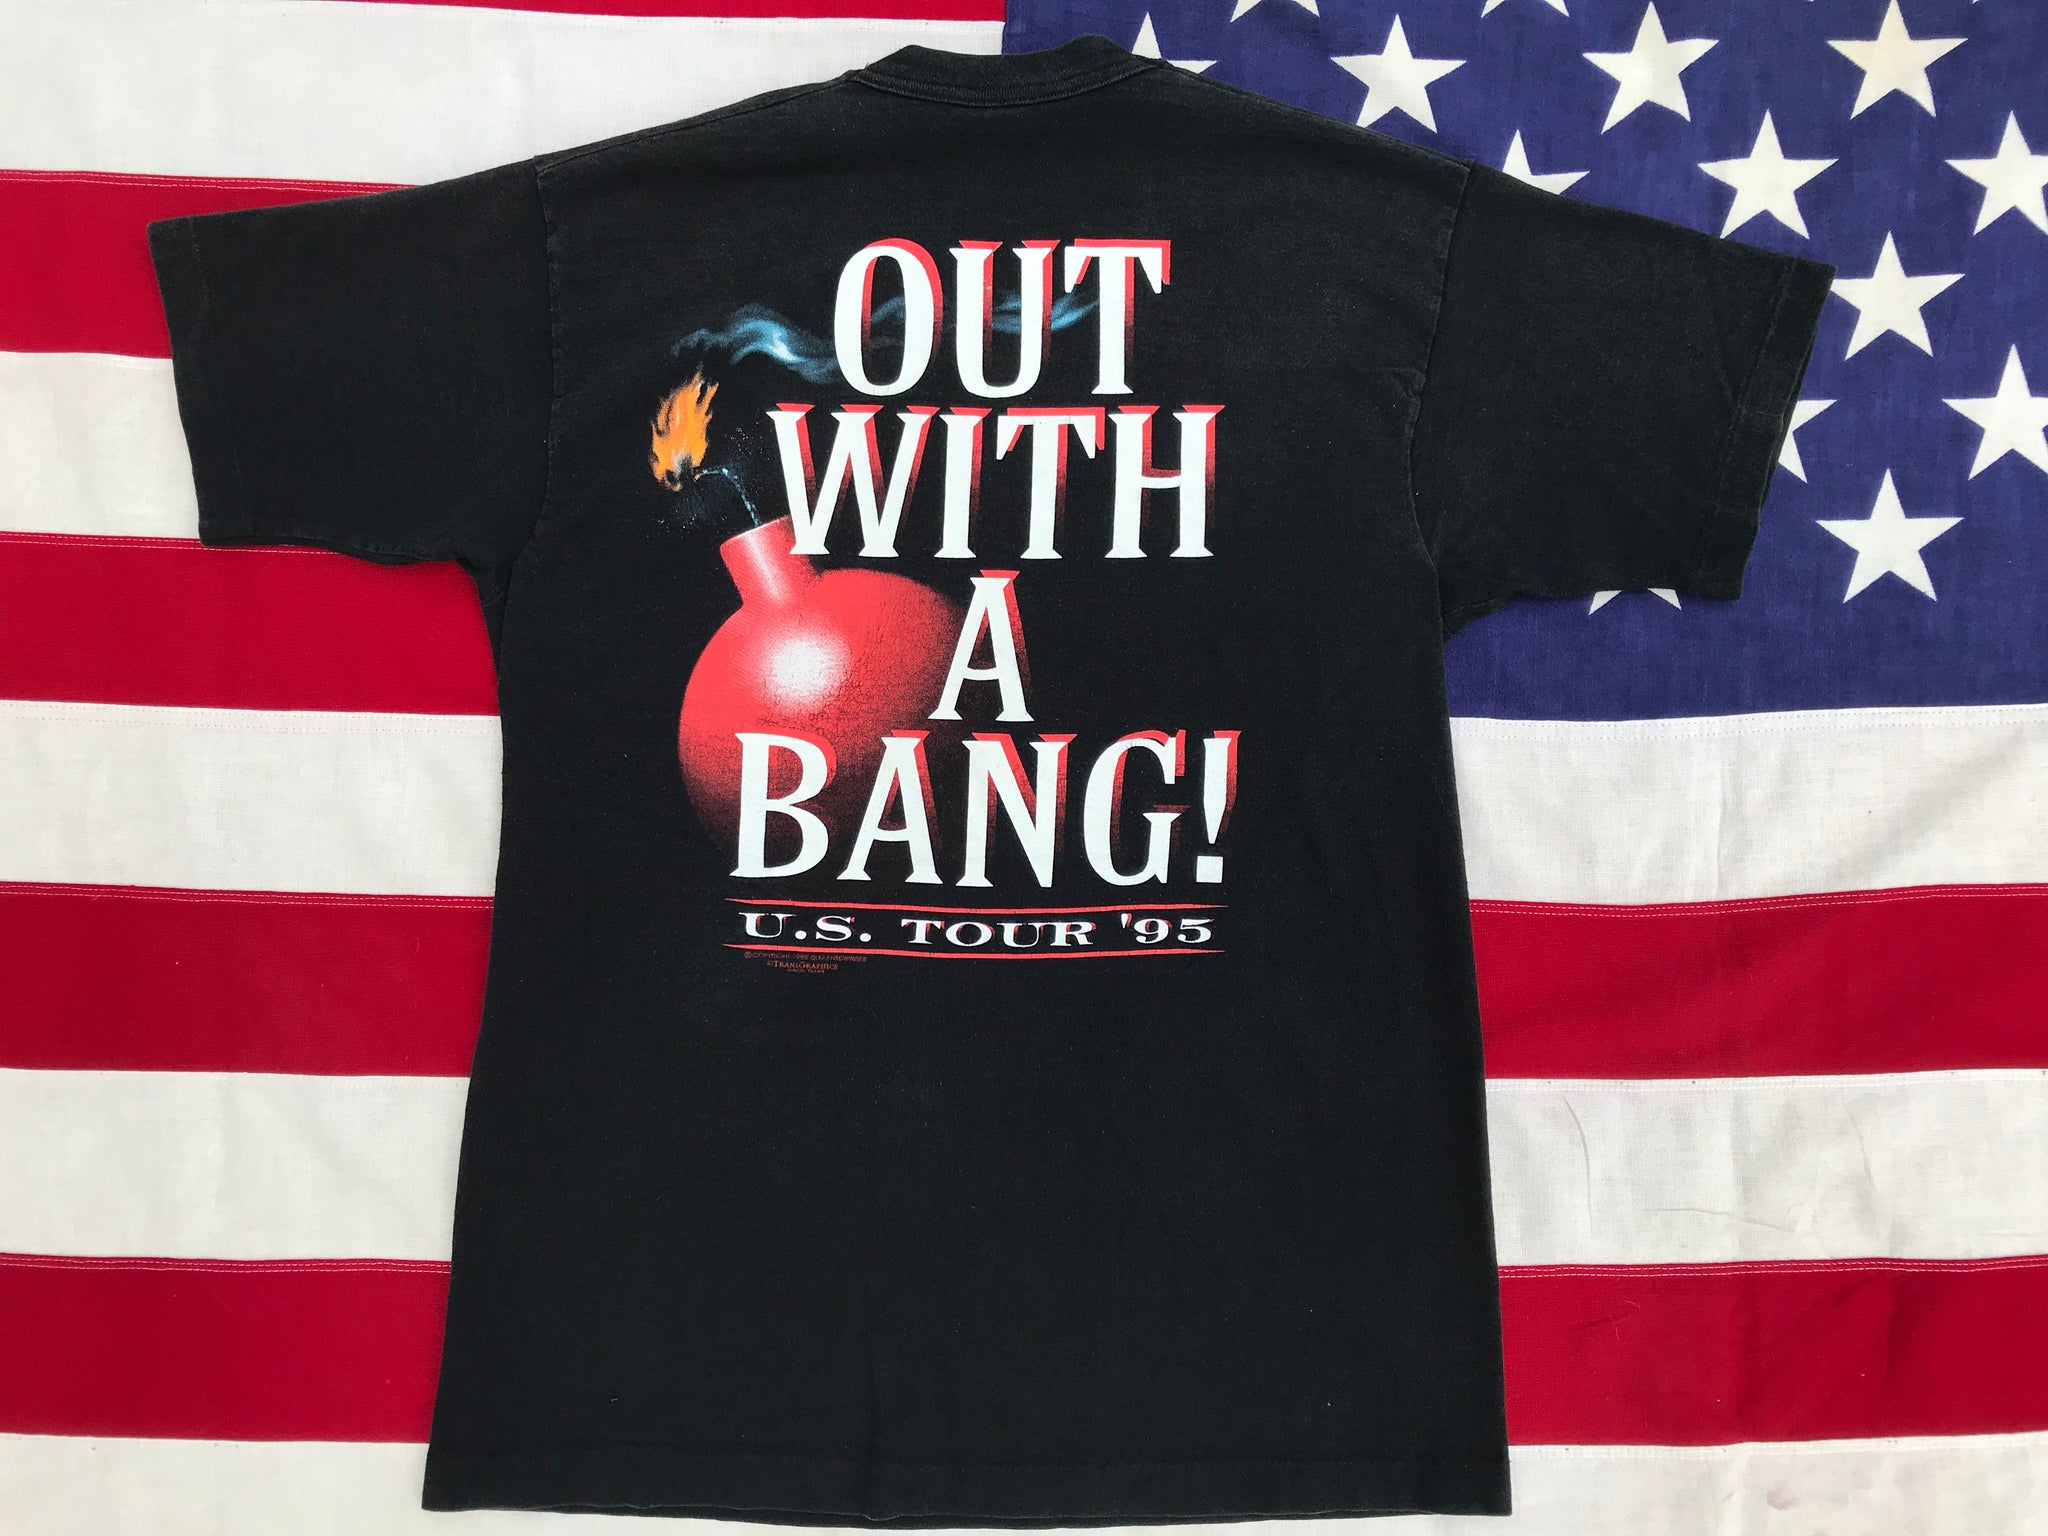 David Lee Murphy  “ Out With A Bang U.S. Tour ‘95 “ Original Vintage Rock T-Shirt by Fruit Of The Loom Made in USA